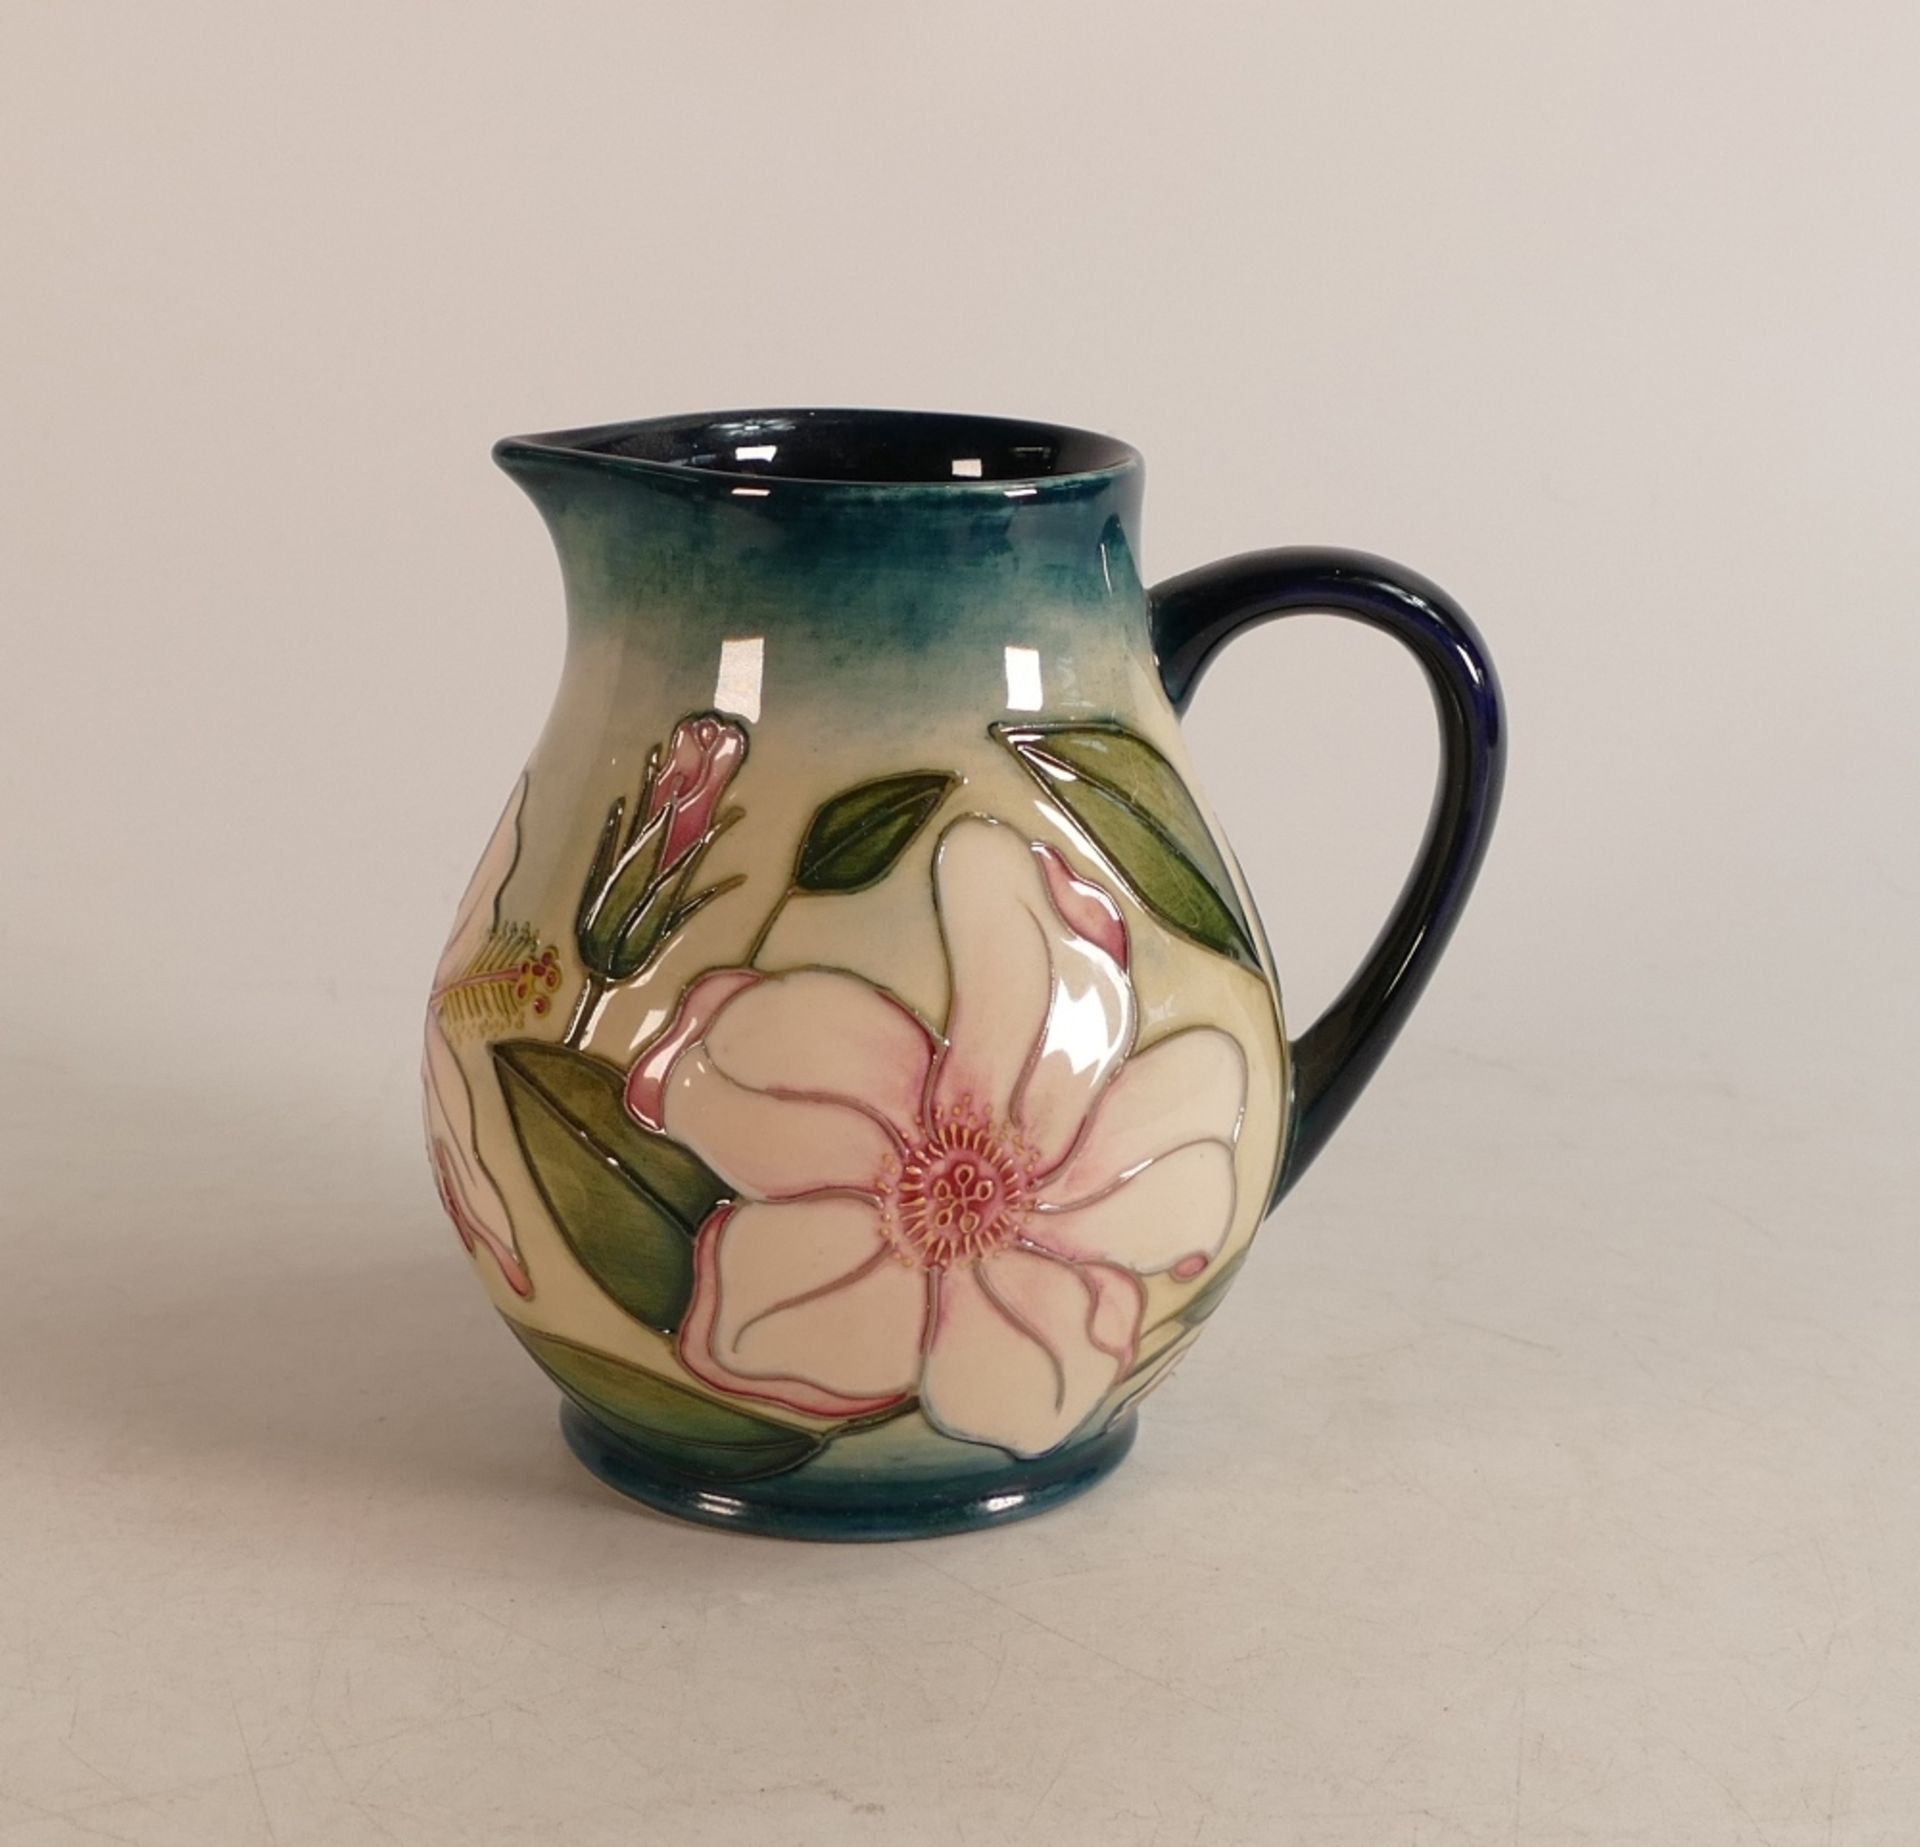 Moorcroft design trial Hibiscus Moon jug, dated 7/1/03, signed Sian Leeper, boxed, height 12cm